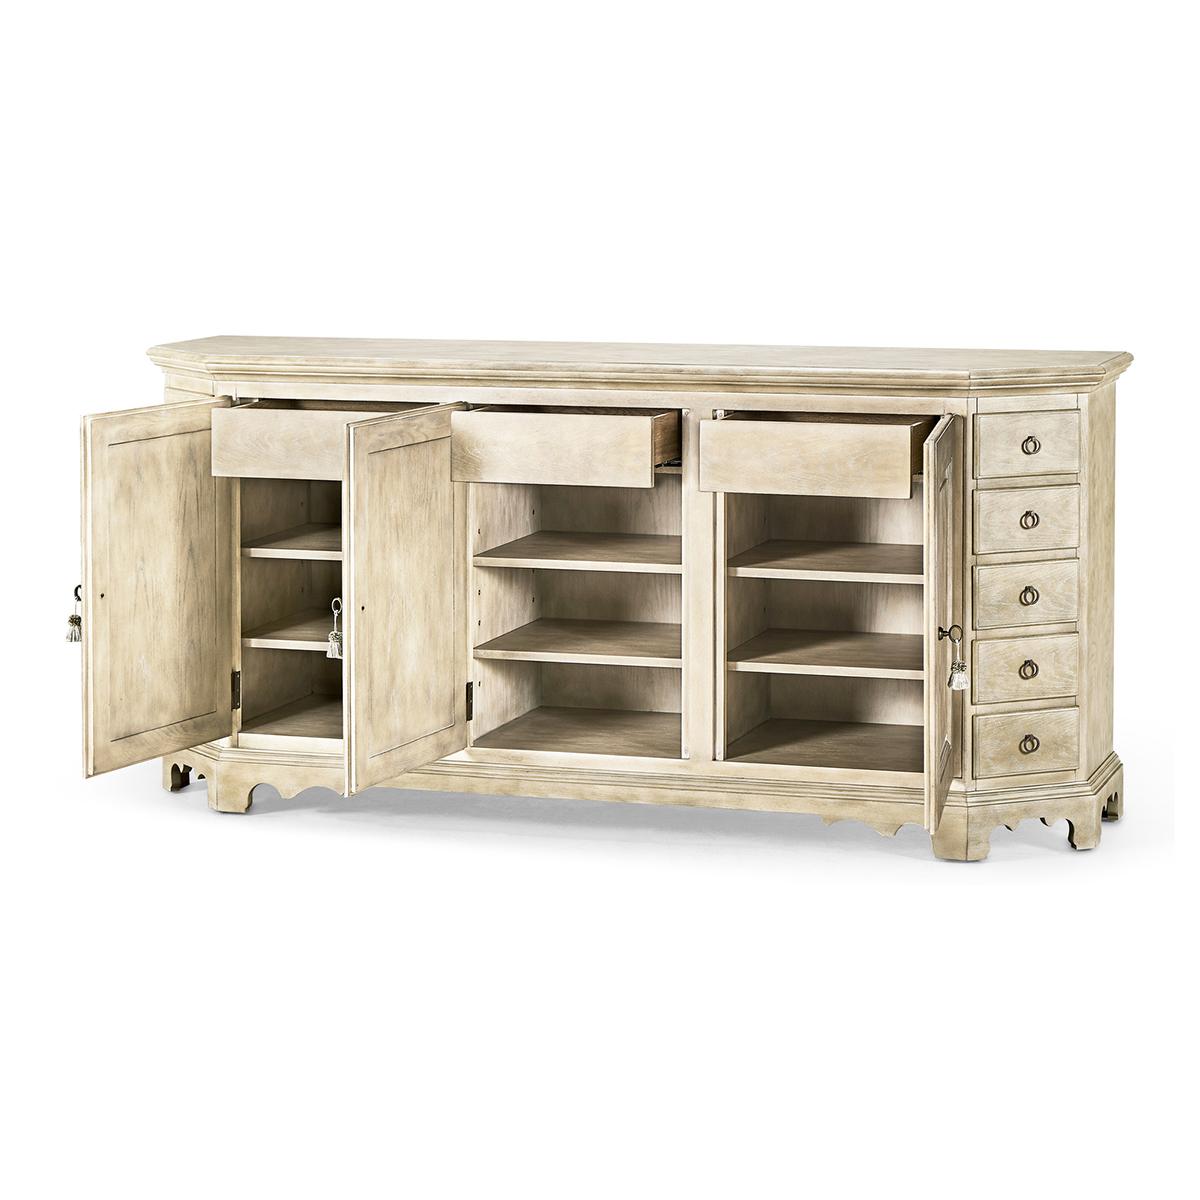 French Provincial Provincial Buffet Sideboard For Sale